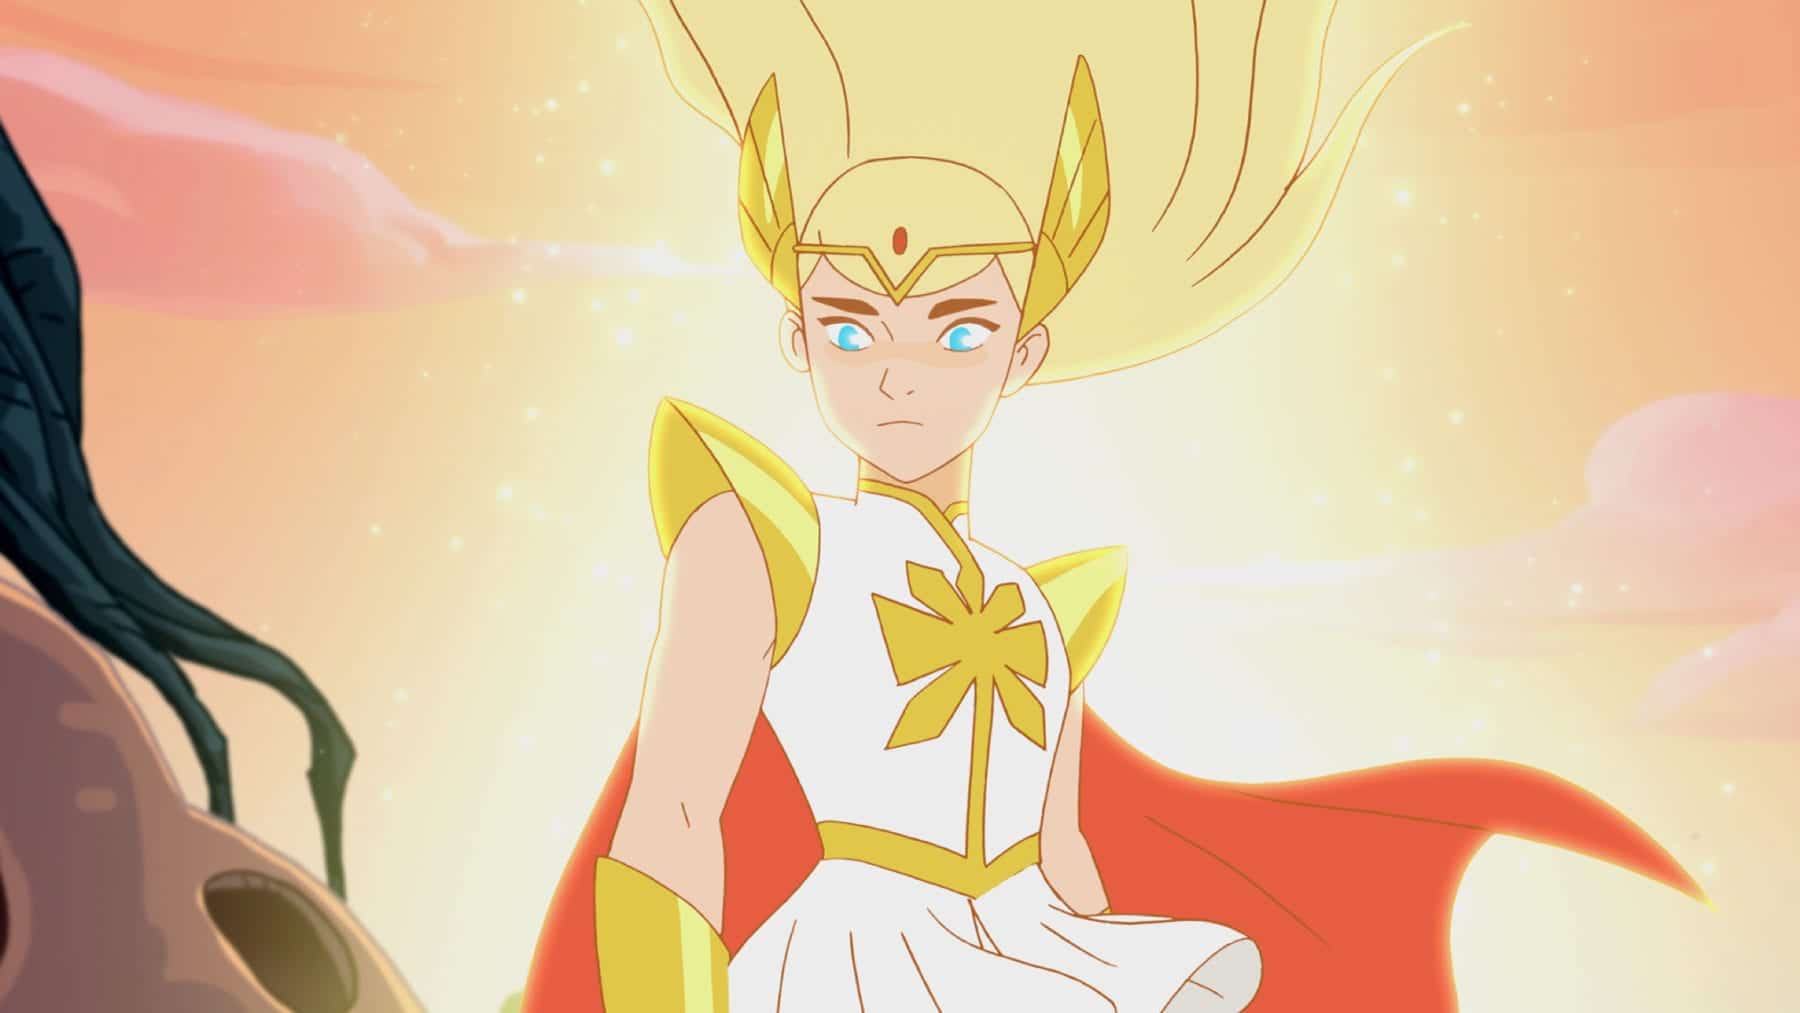 She-Ra And The Princesses Of Power Ending After 5 Seasons